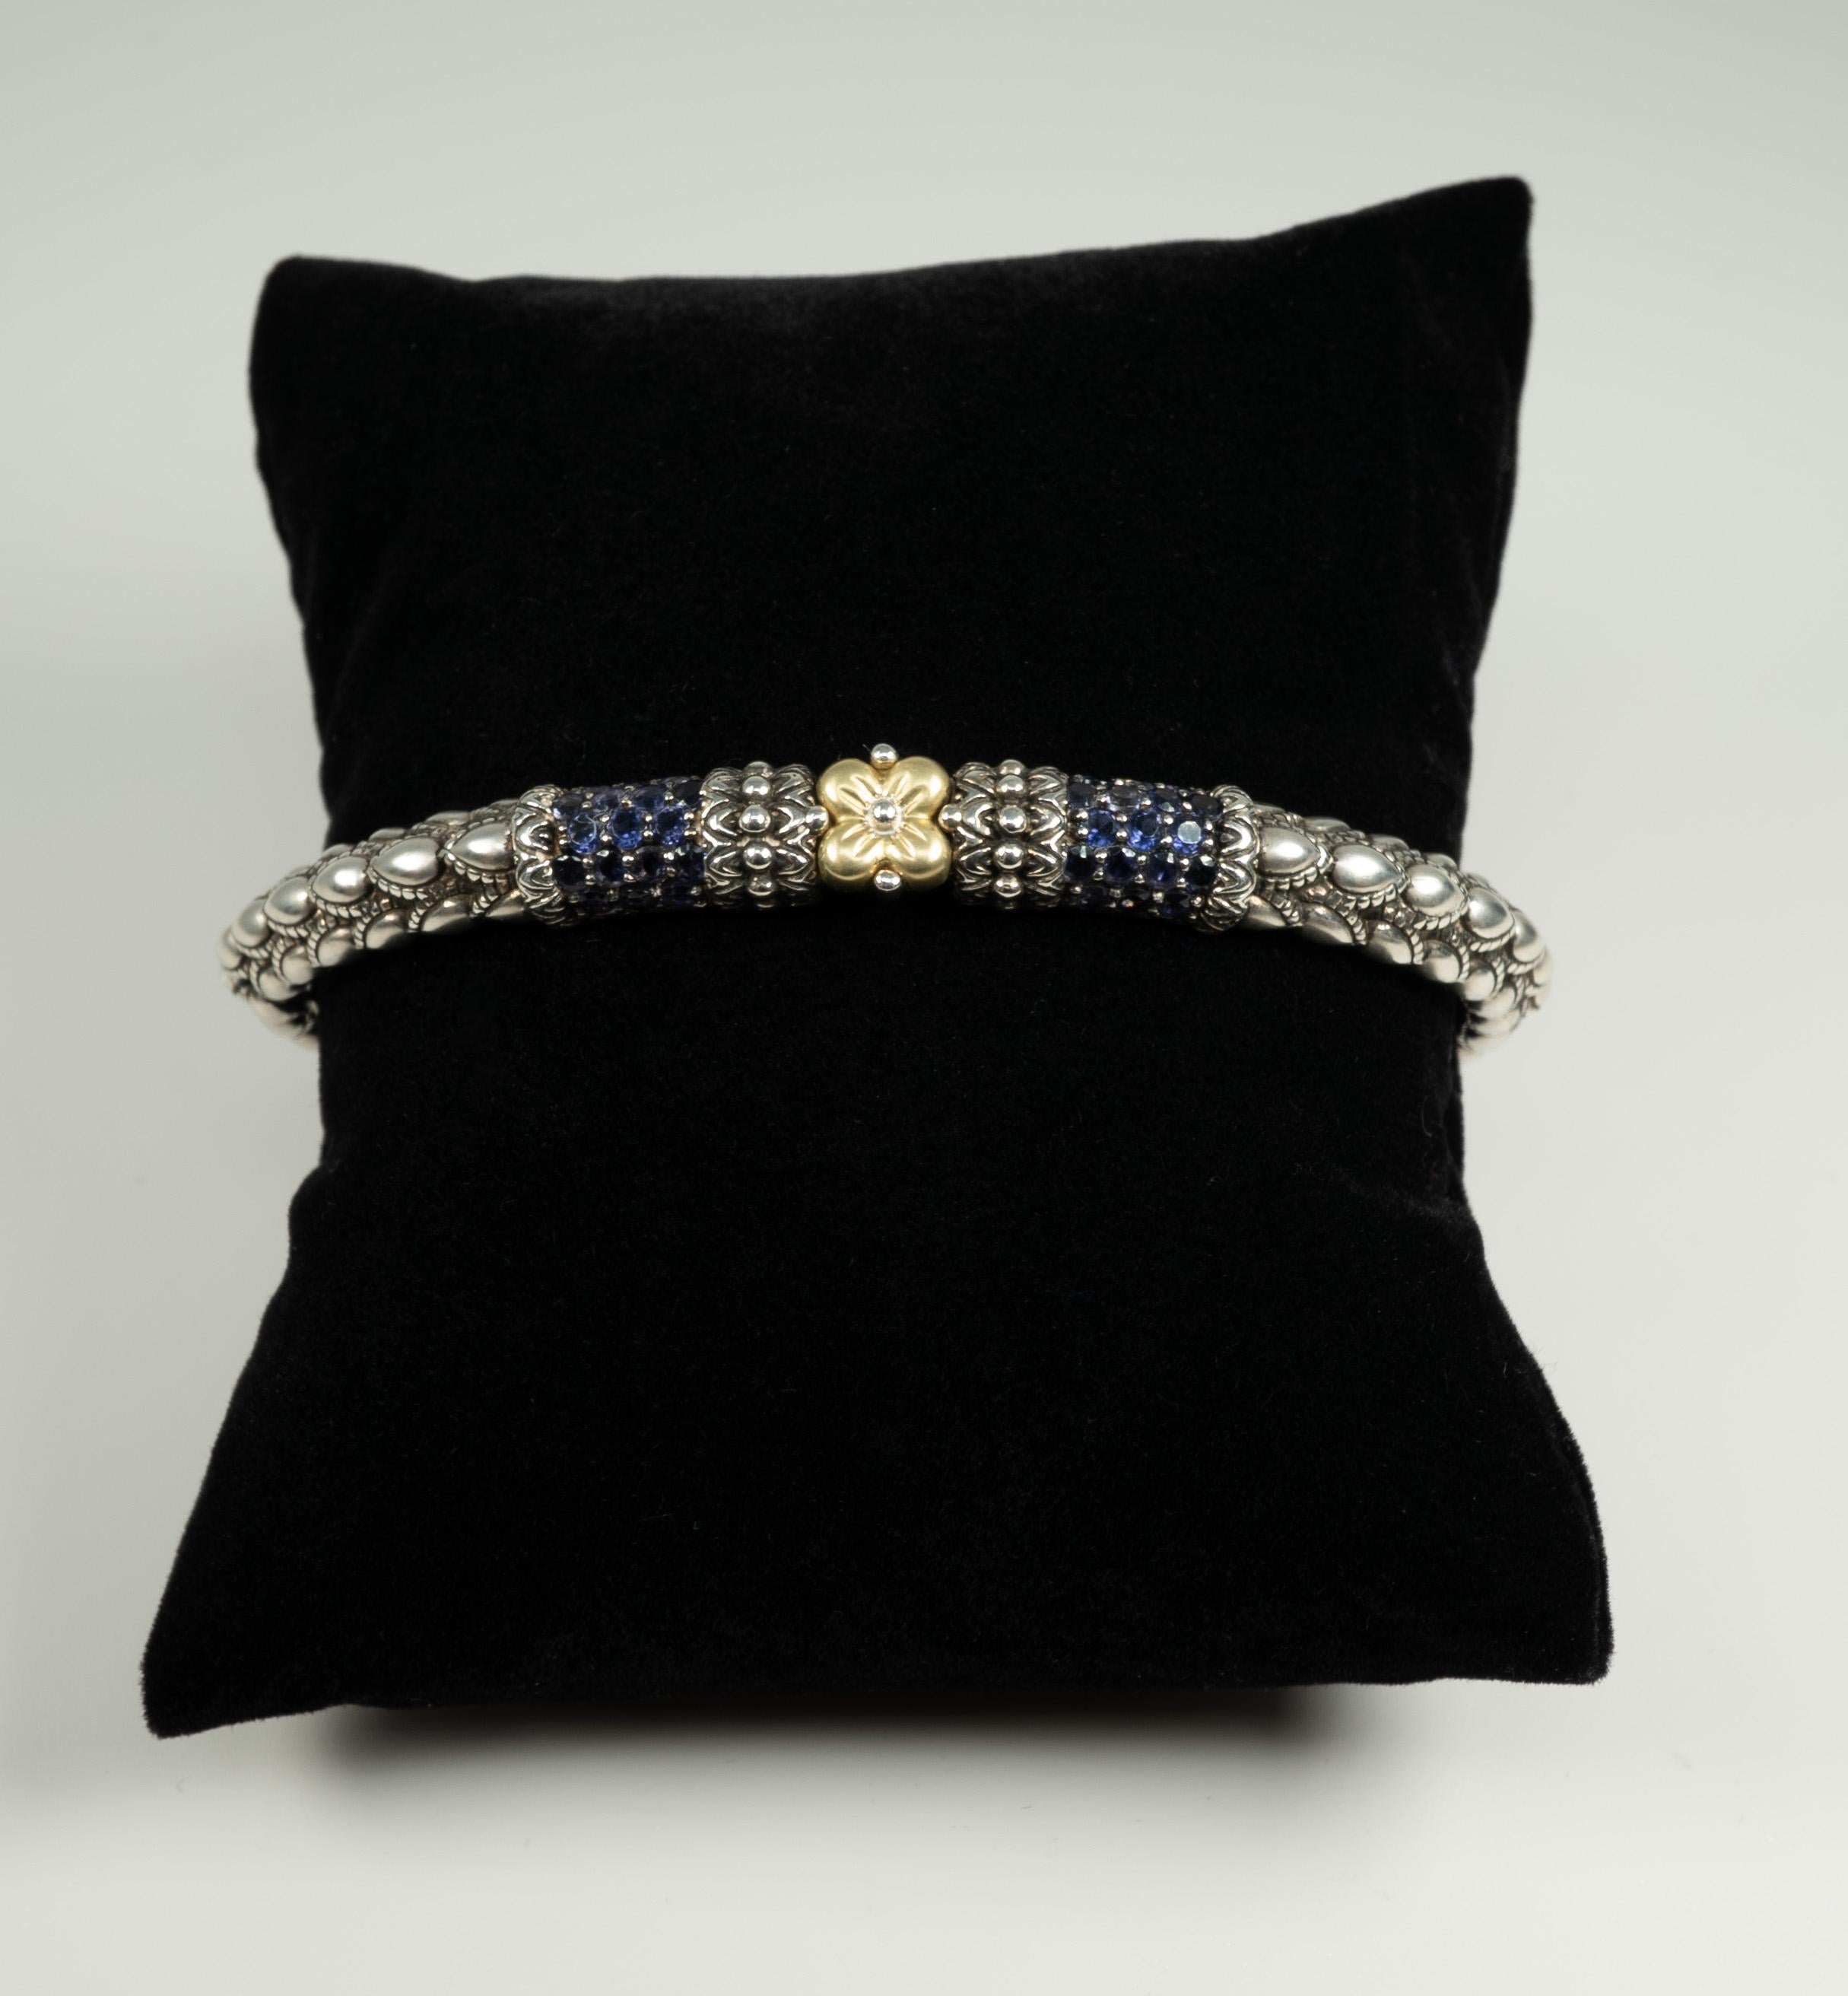 In sterling silver, with 18 karat yellow gold and iolite accents and a stainless steel hinge, this fun cuff is very light on the wrist! 